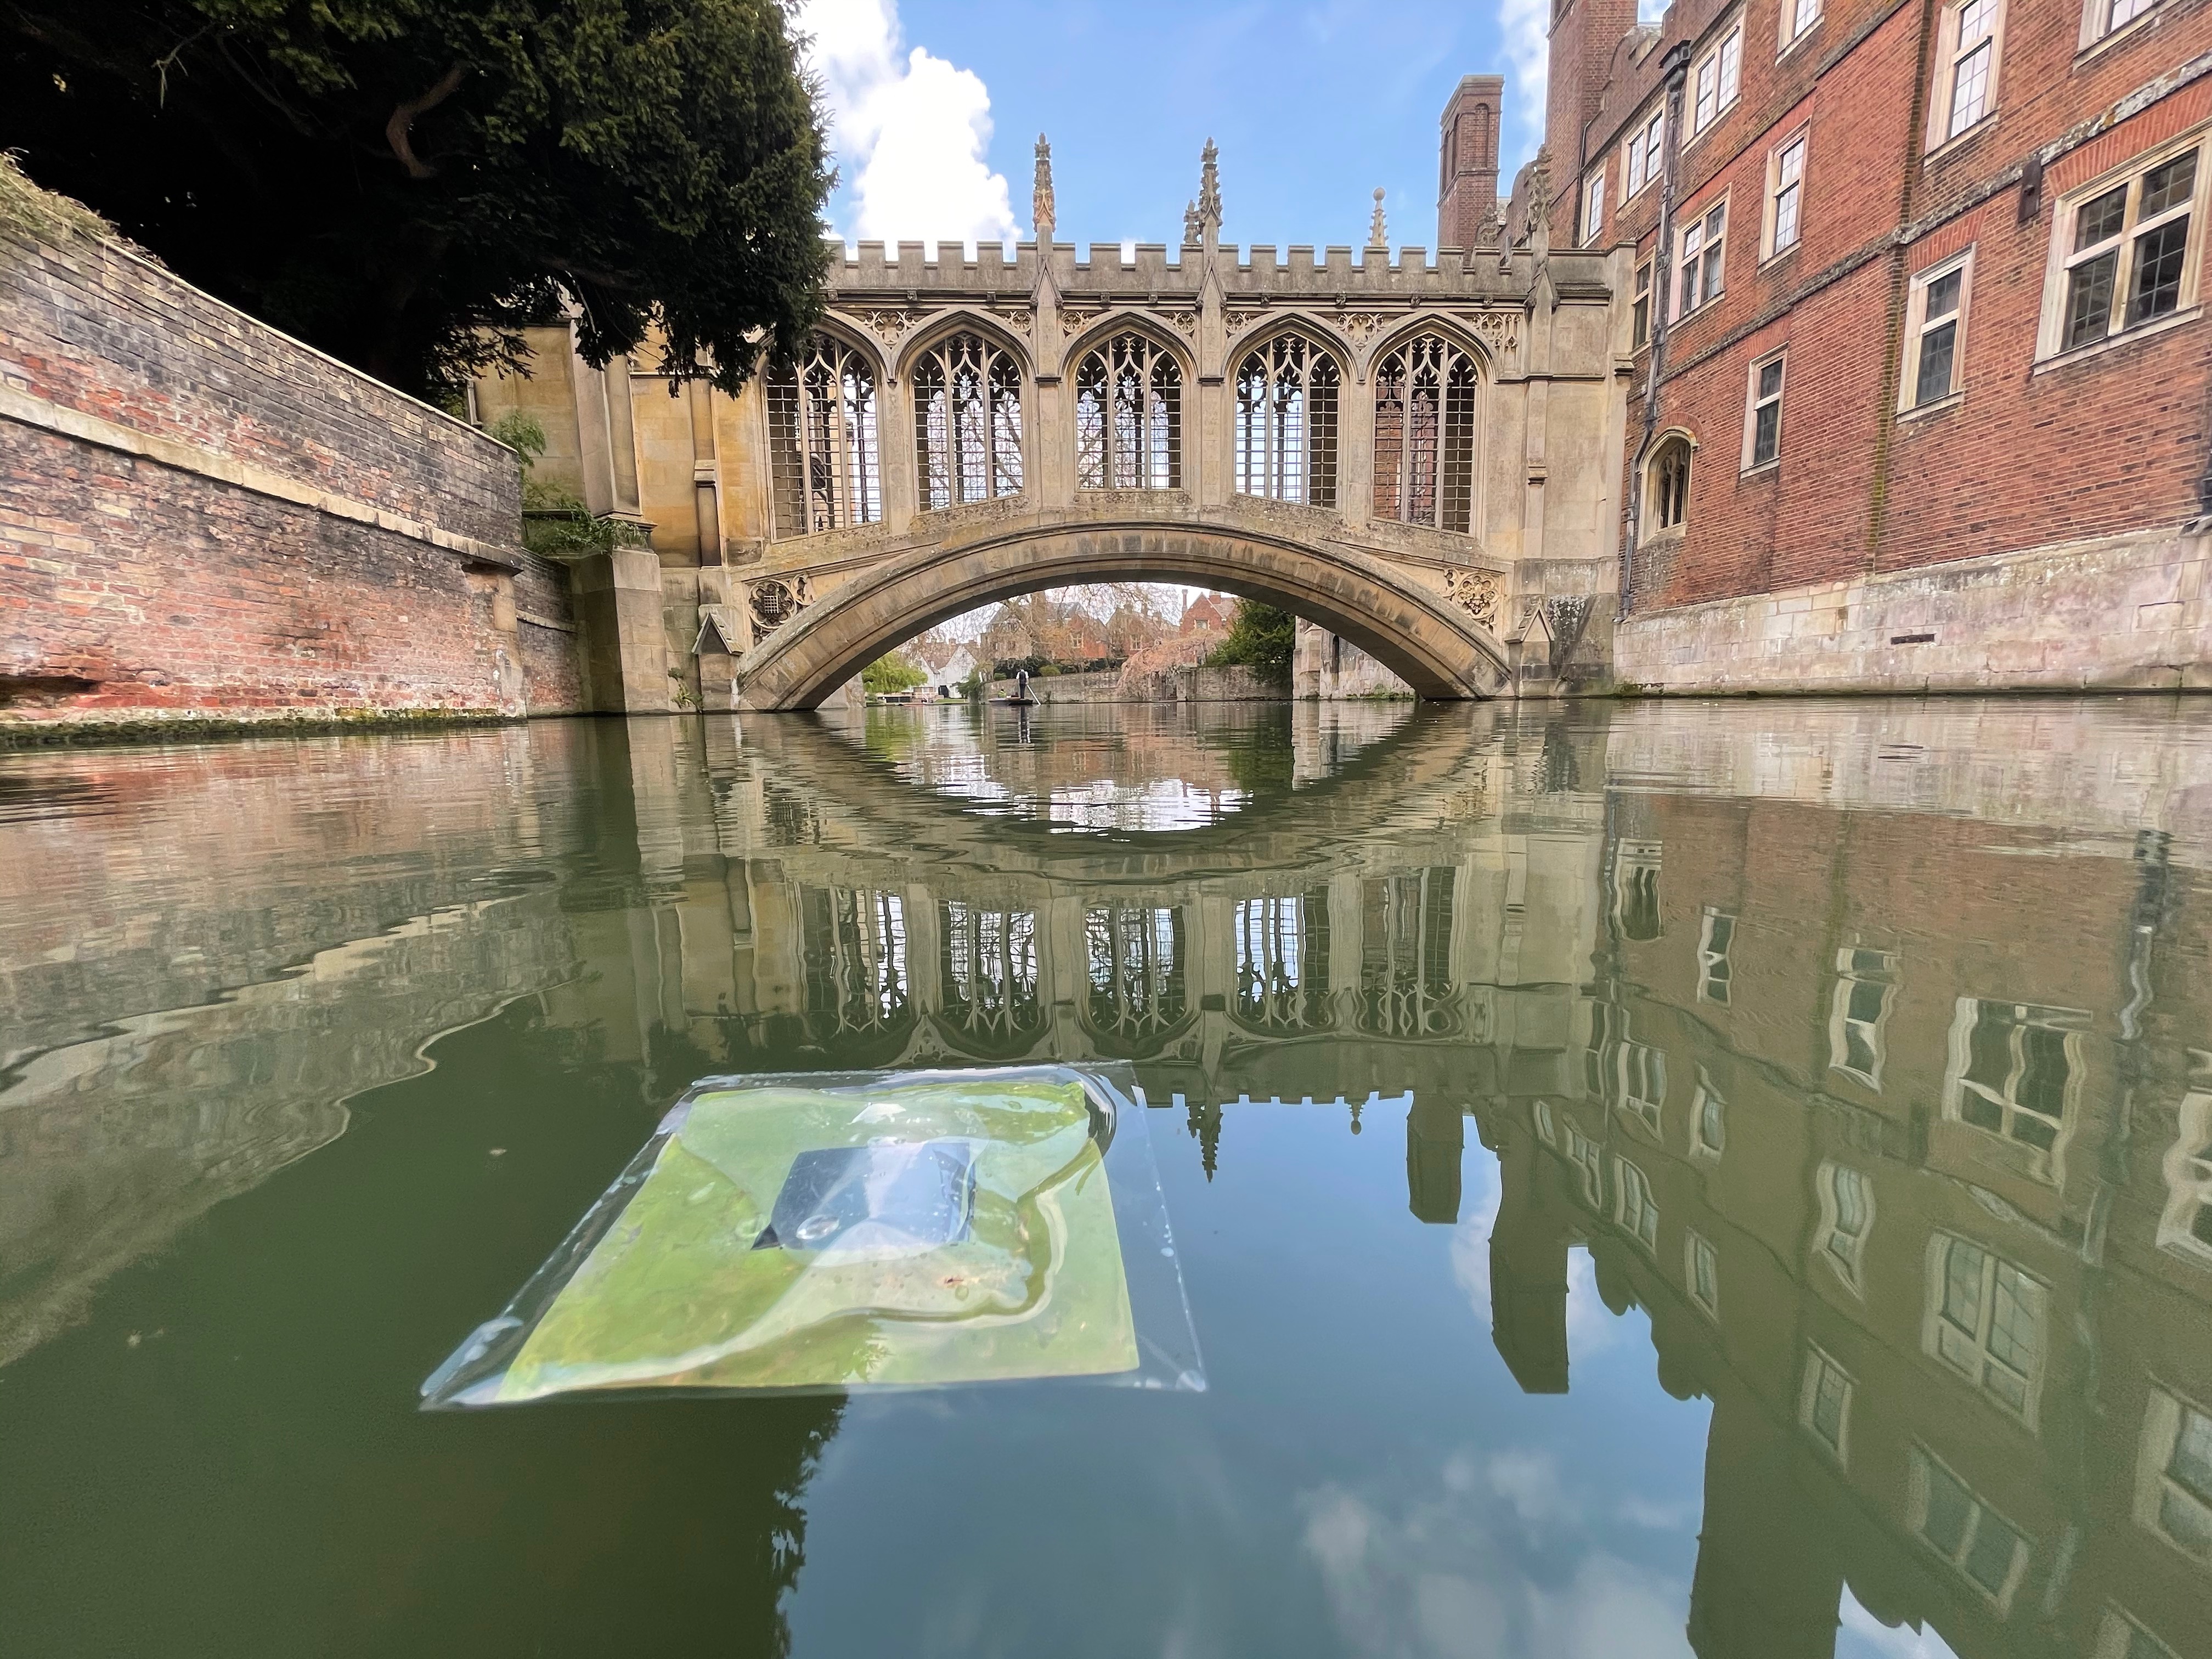 Artificial leaf in front of the Bridge of Sighs